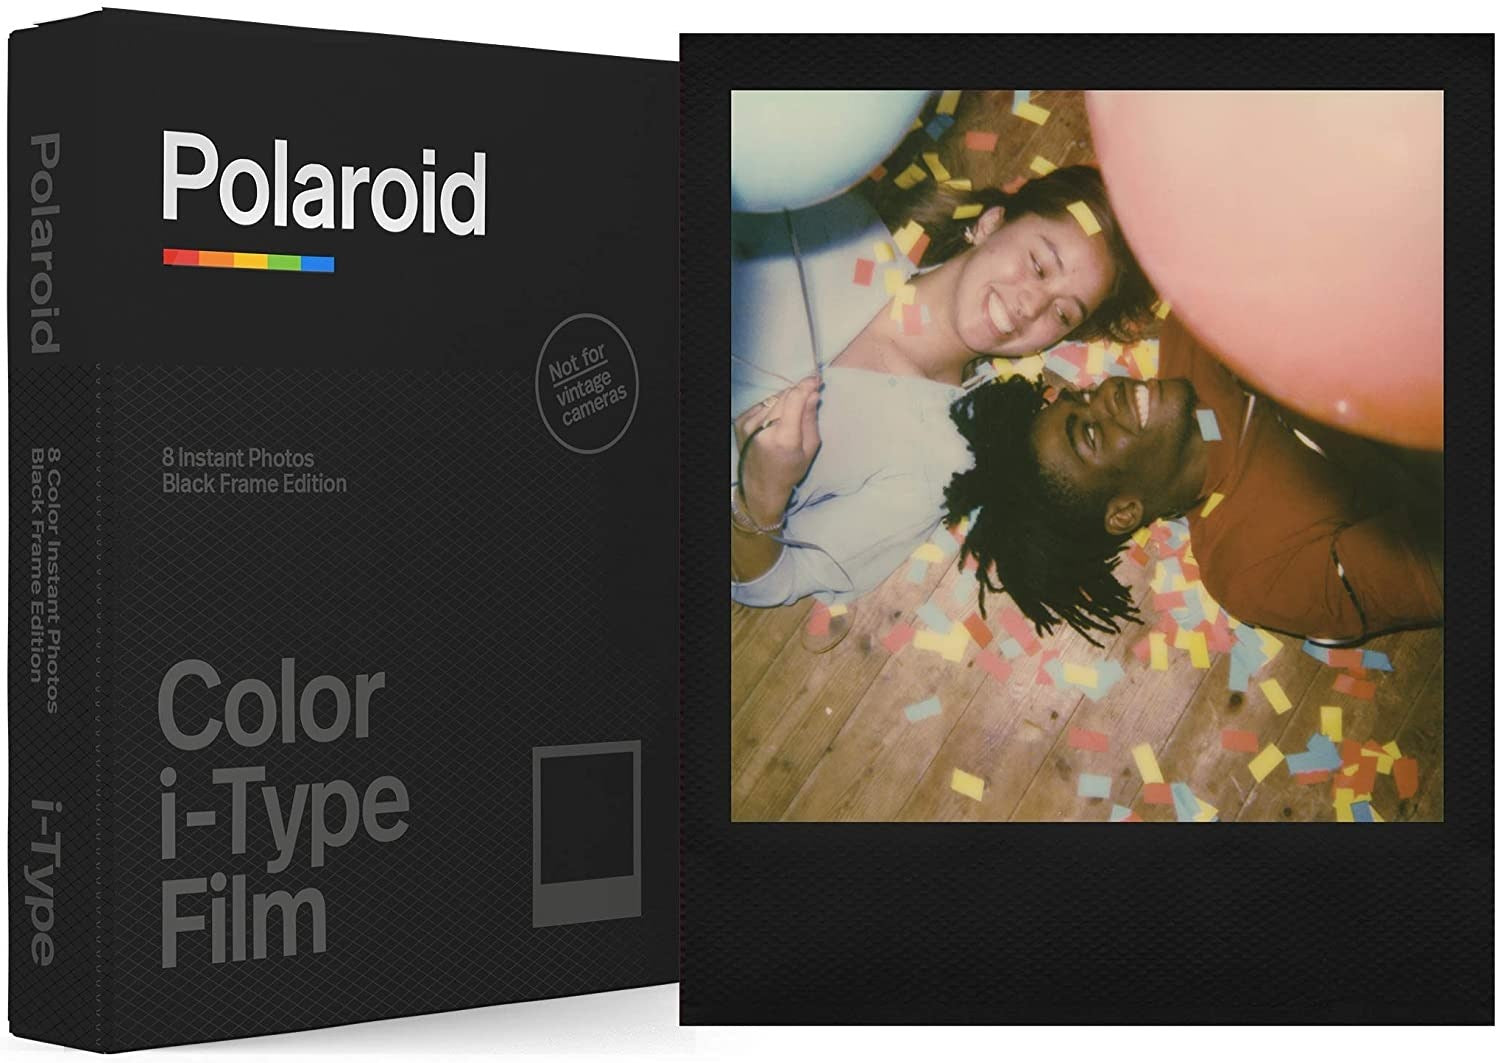 Product Image of Polaroid Instant Colour Film for I-Type cameras - Black Frame Edition (6019) 8 exp